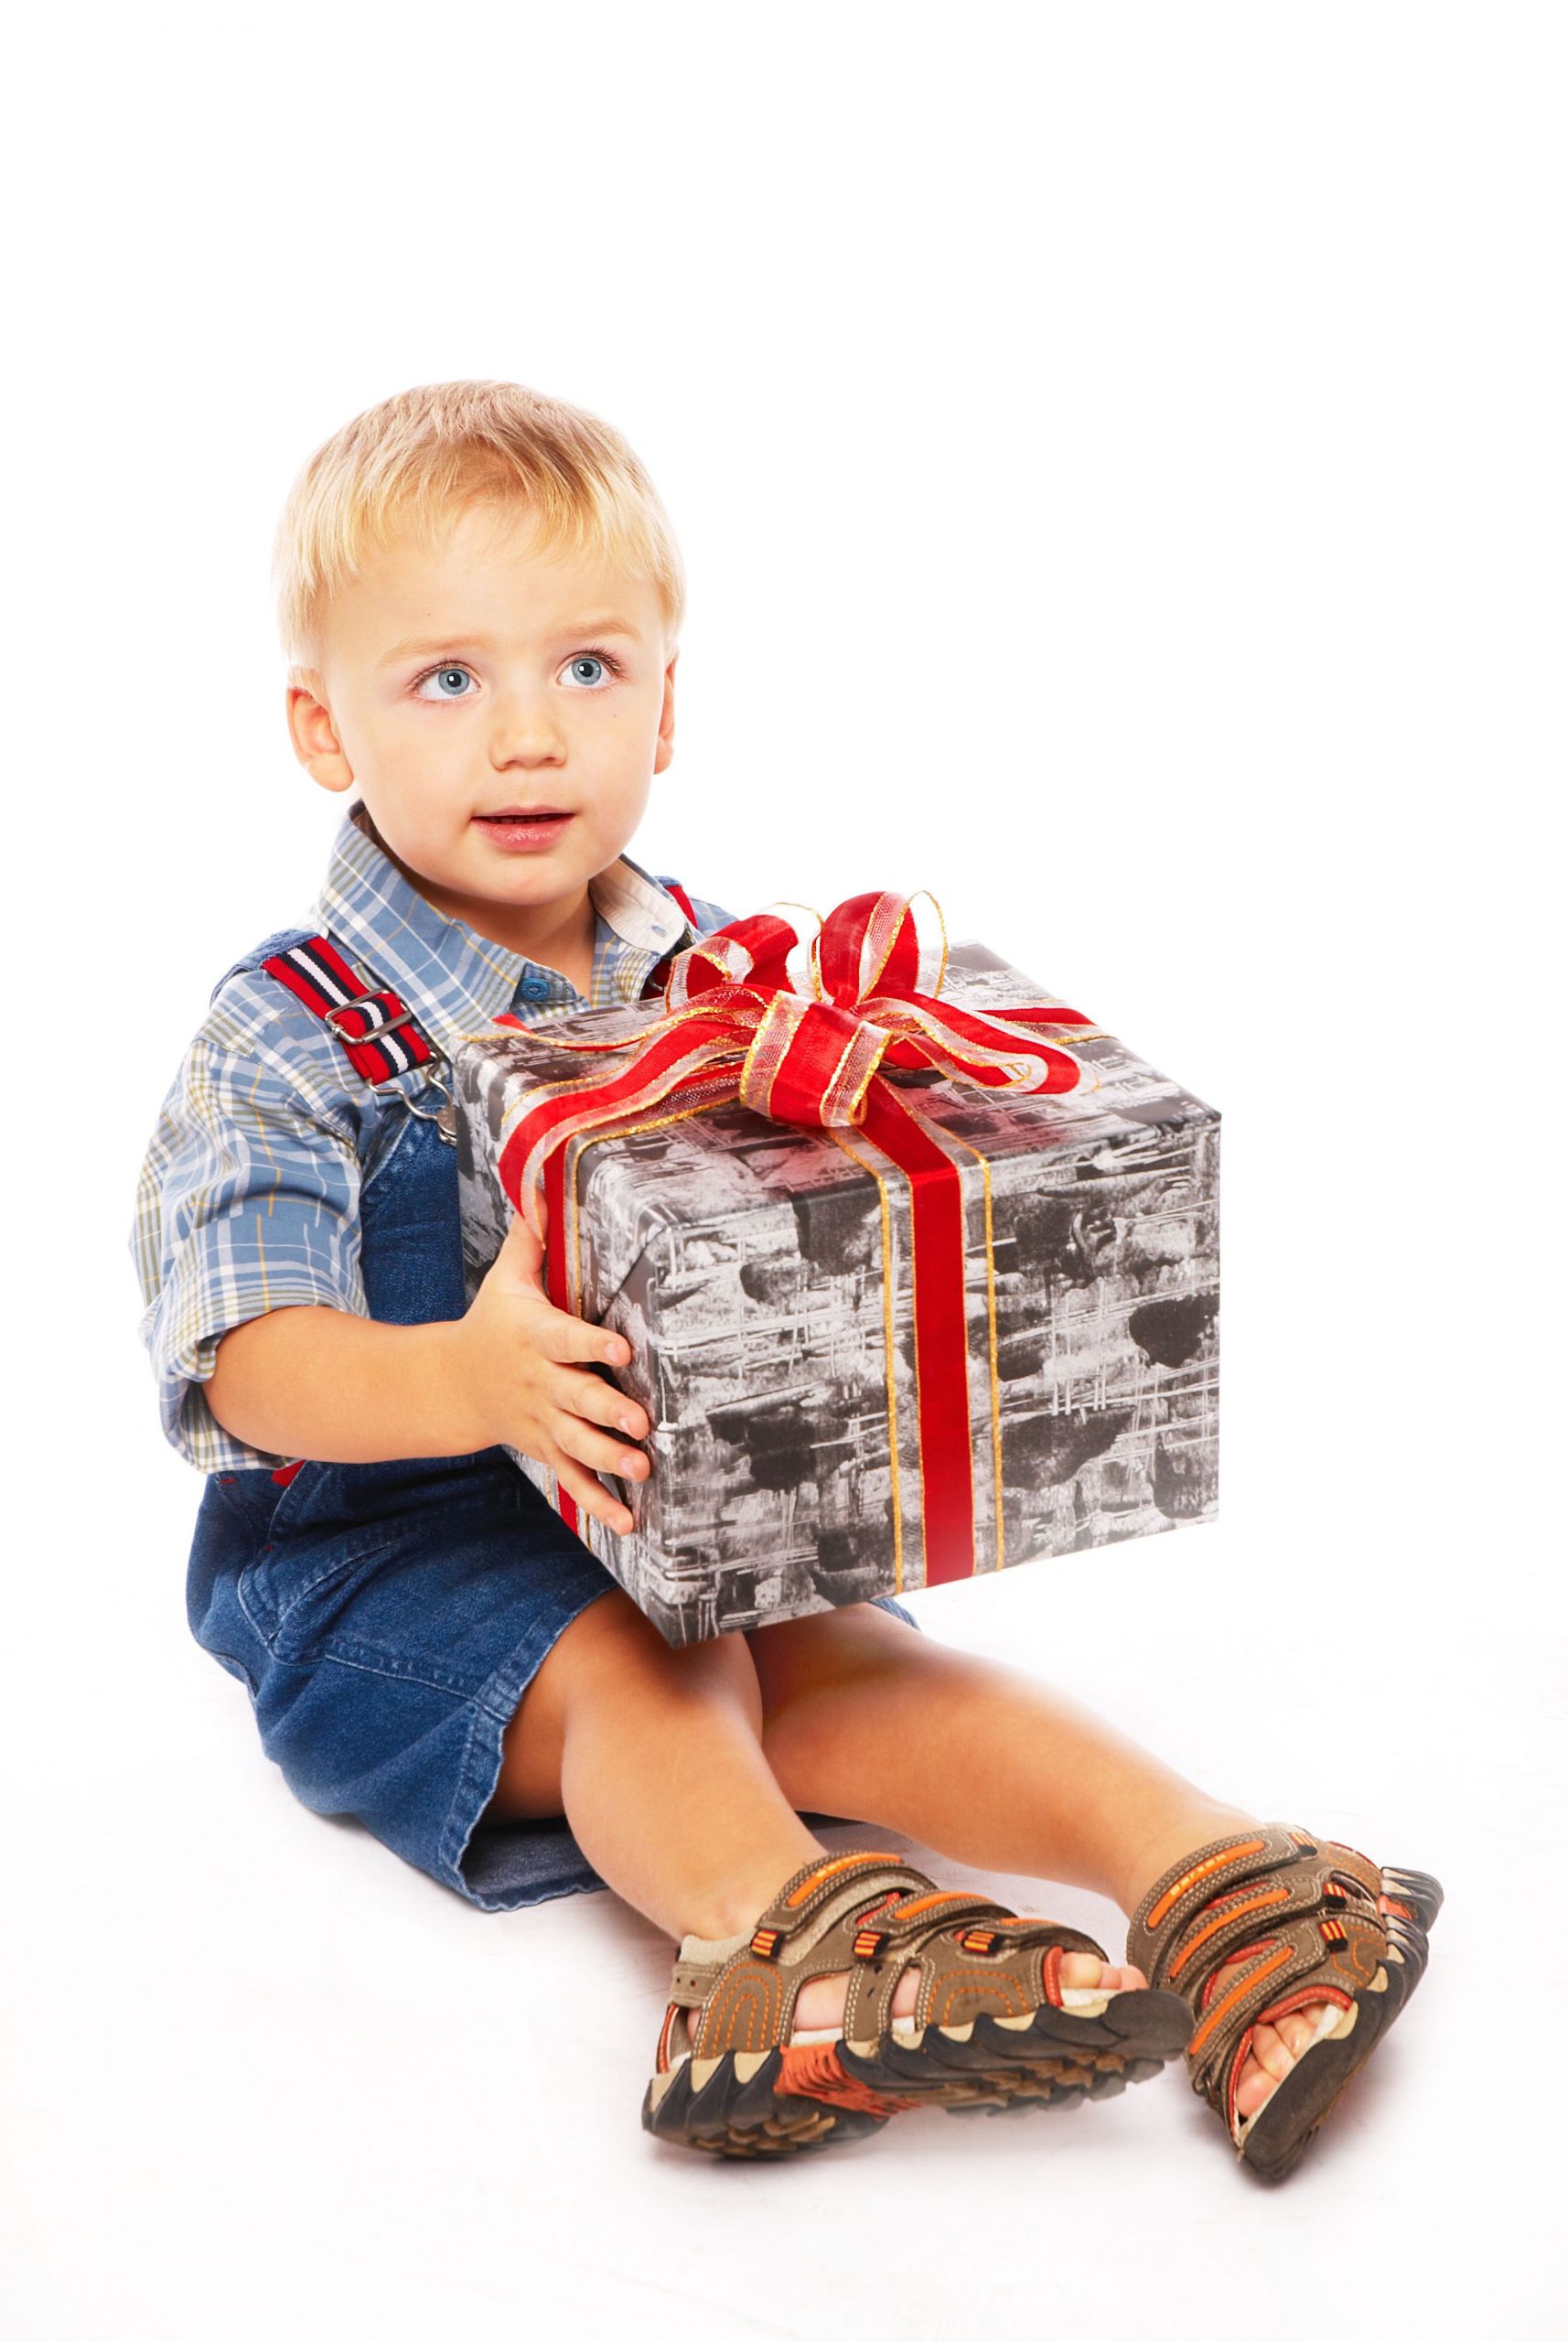 3 Year Old Gift Ideas Boys
 Best Birthday and Christmas Gift Ideas for a Three Year